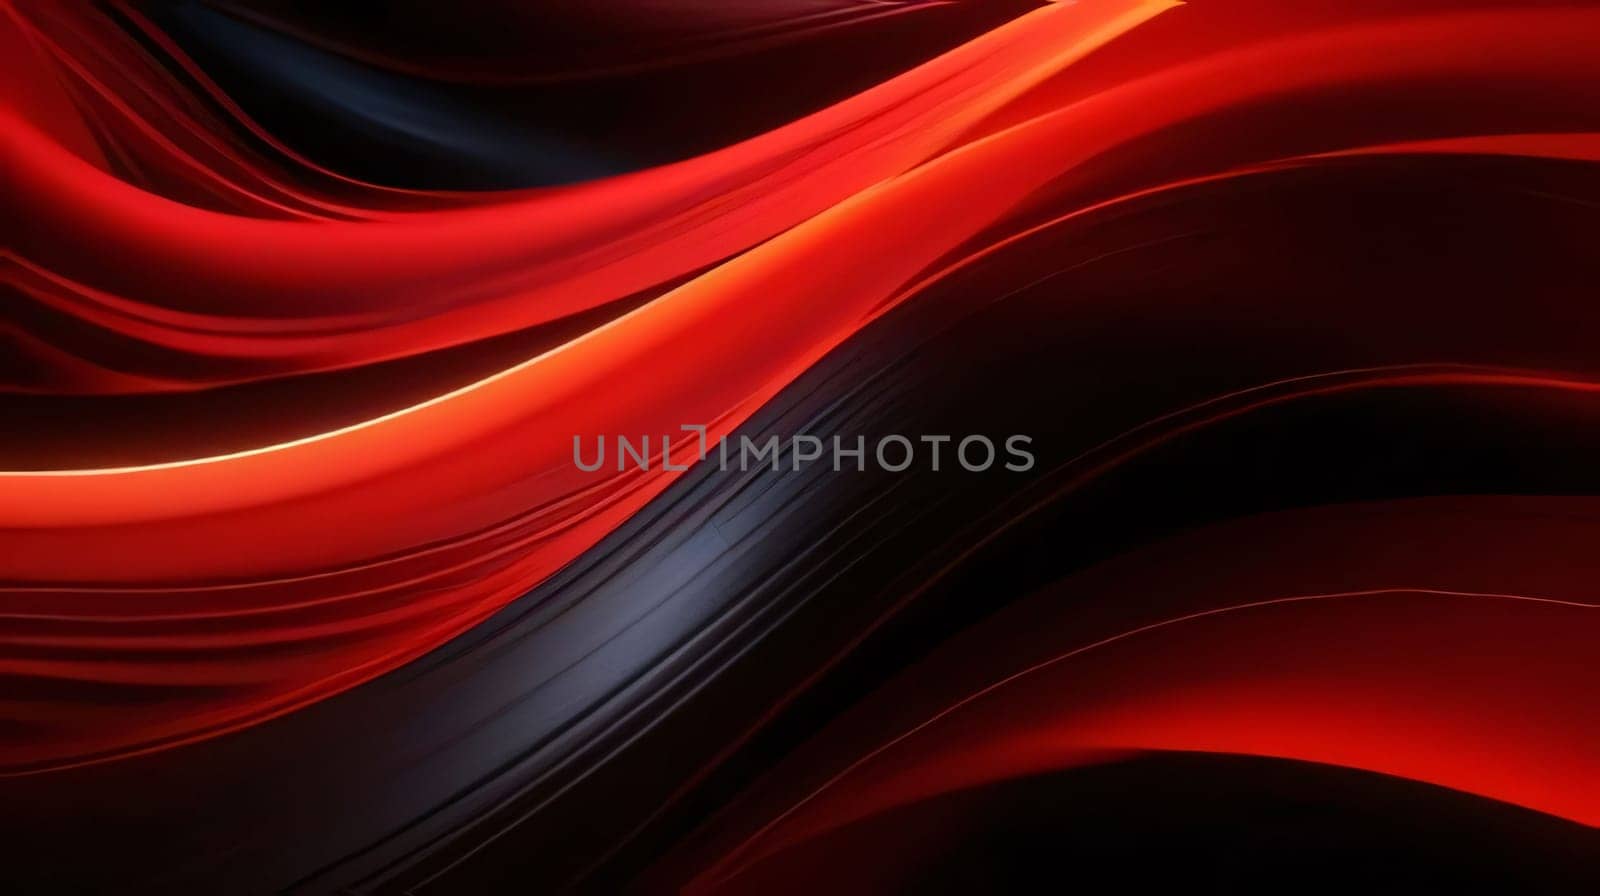 Abstract background design: Red and black abstract wavy background. 3d rendering, 3d illustration.